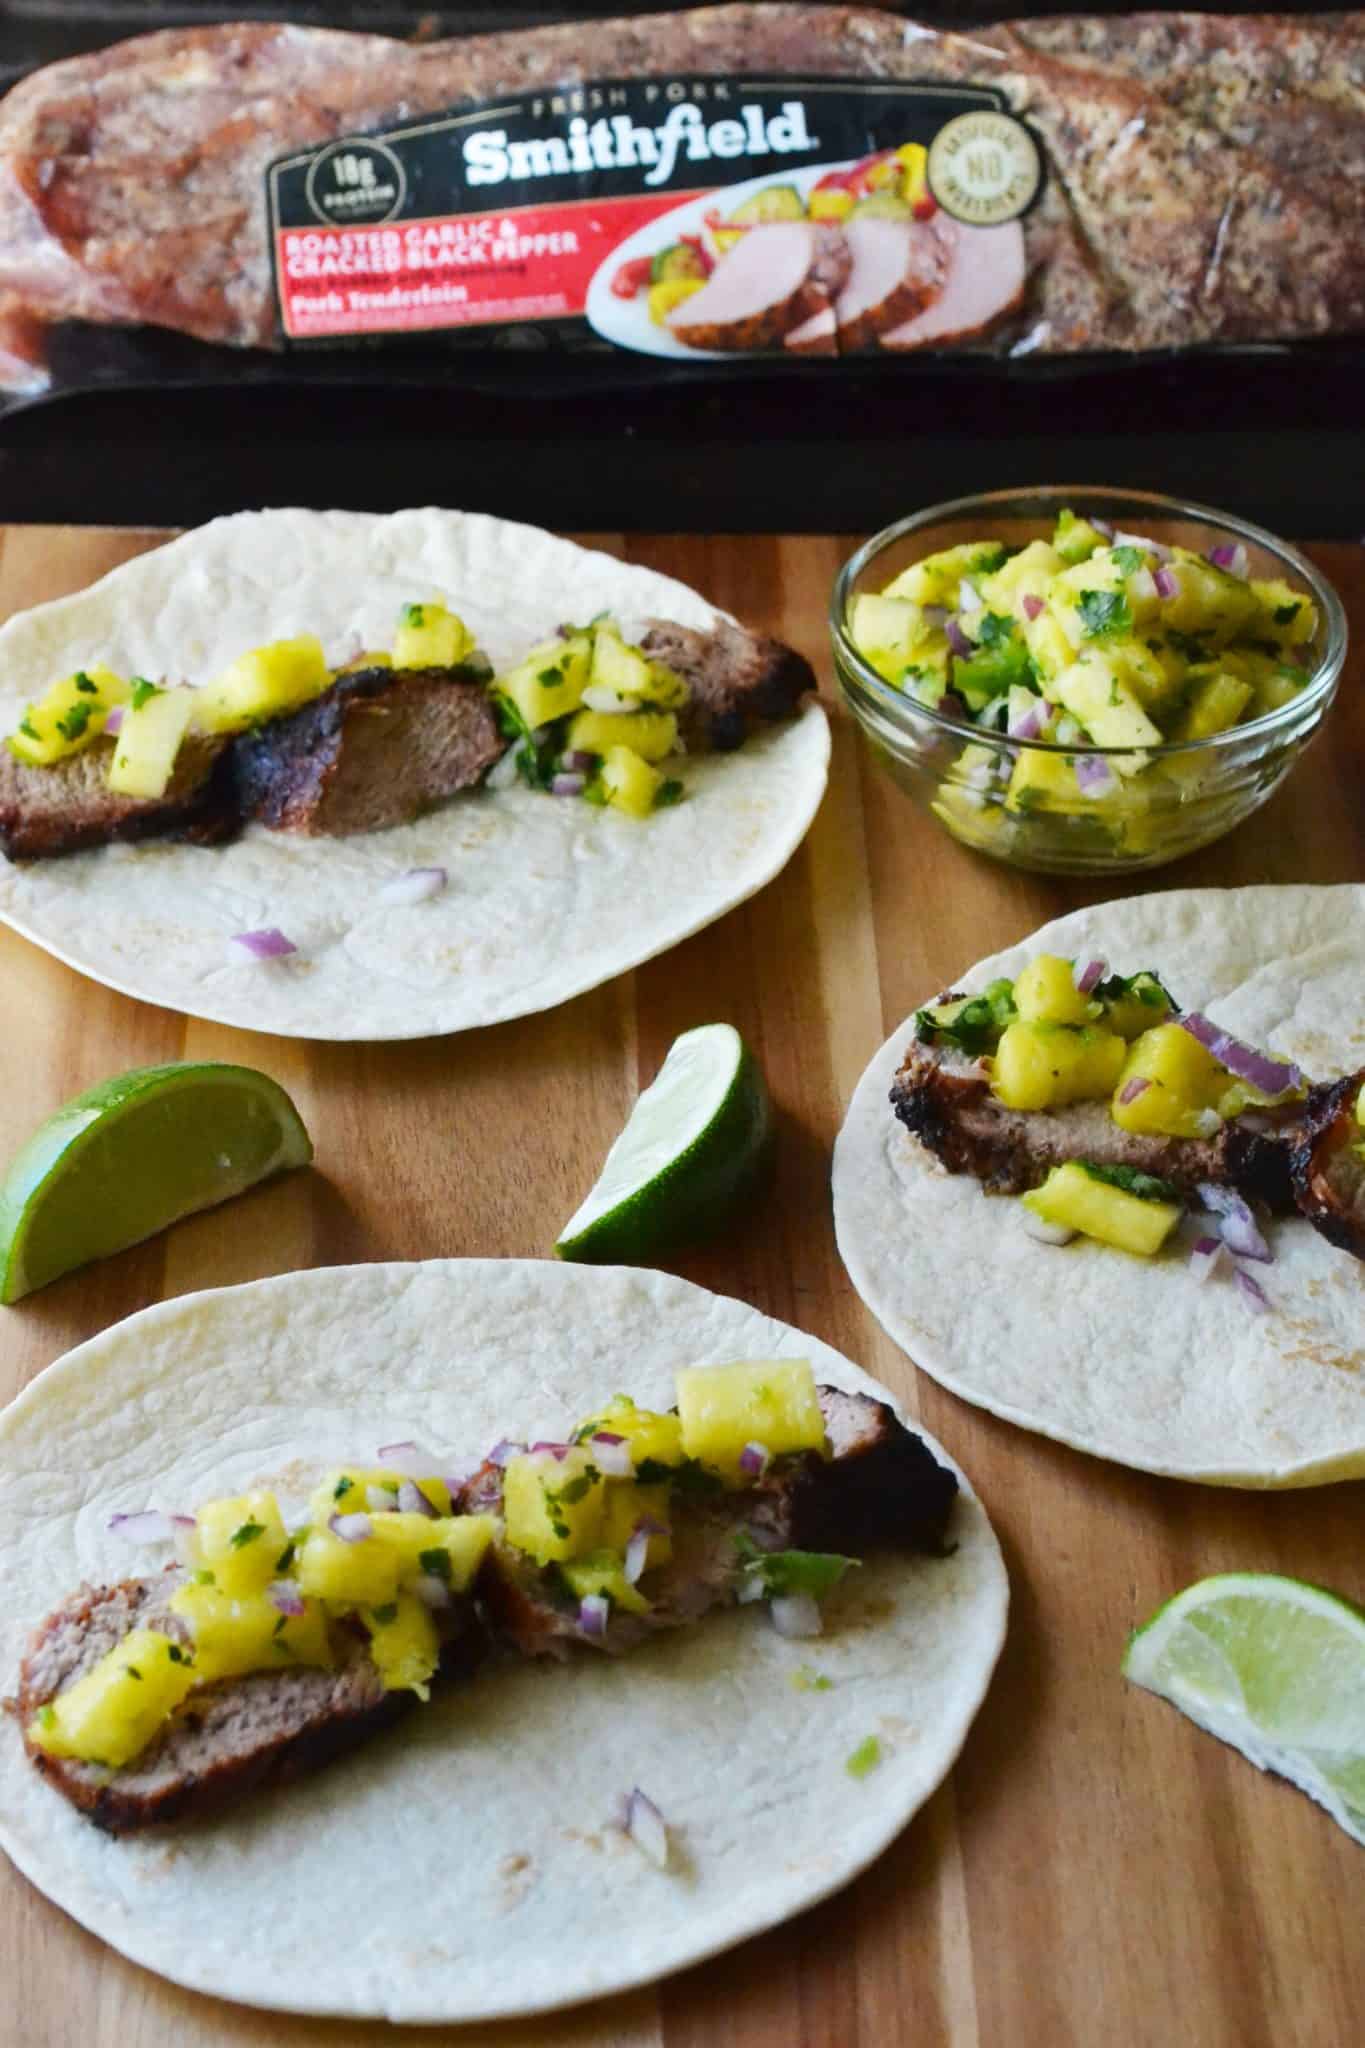 Grilled Pork Tacos with Pineapple Salsa